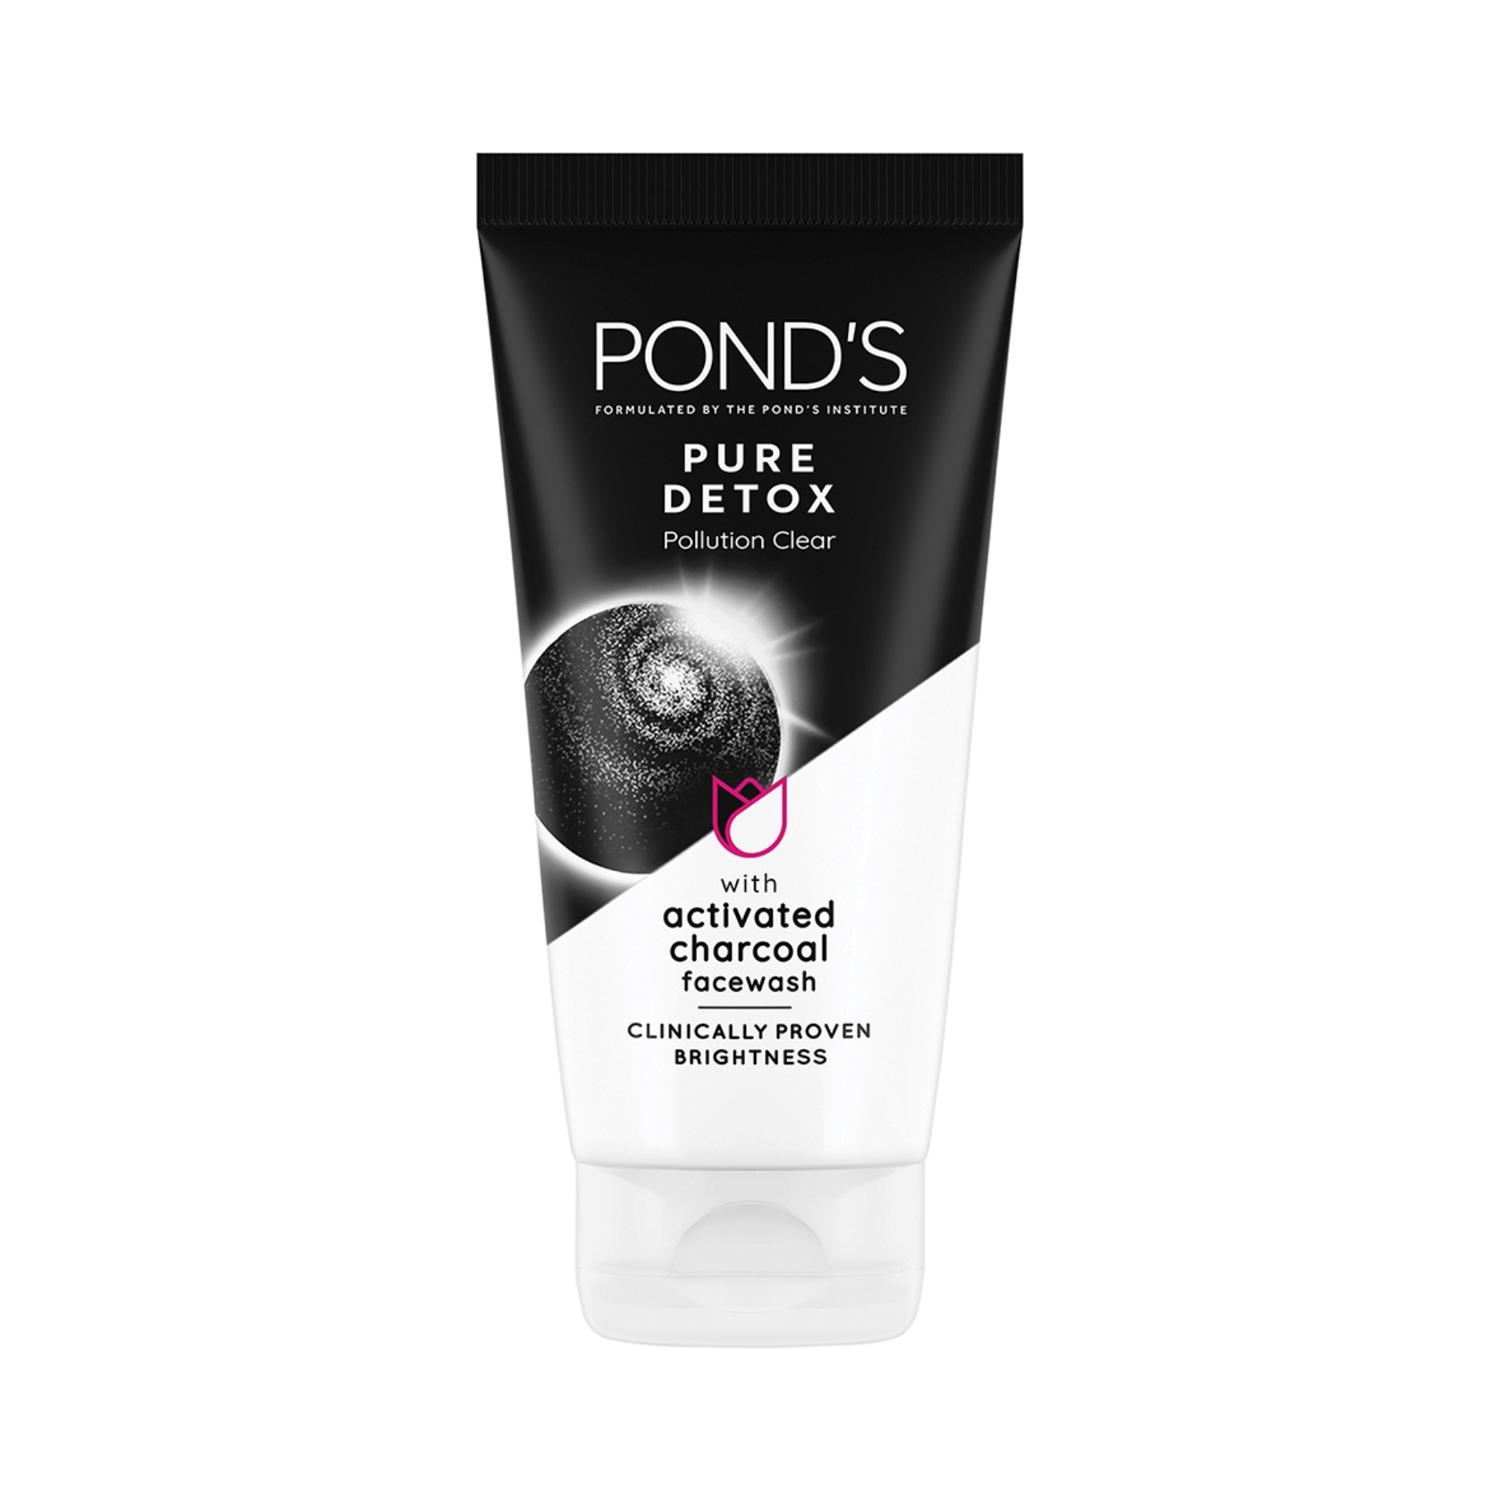 Pond's Pure Detox Anti-Pollution Purity Face Wash With Activated Charcoal - (150g)